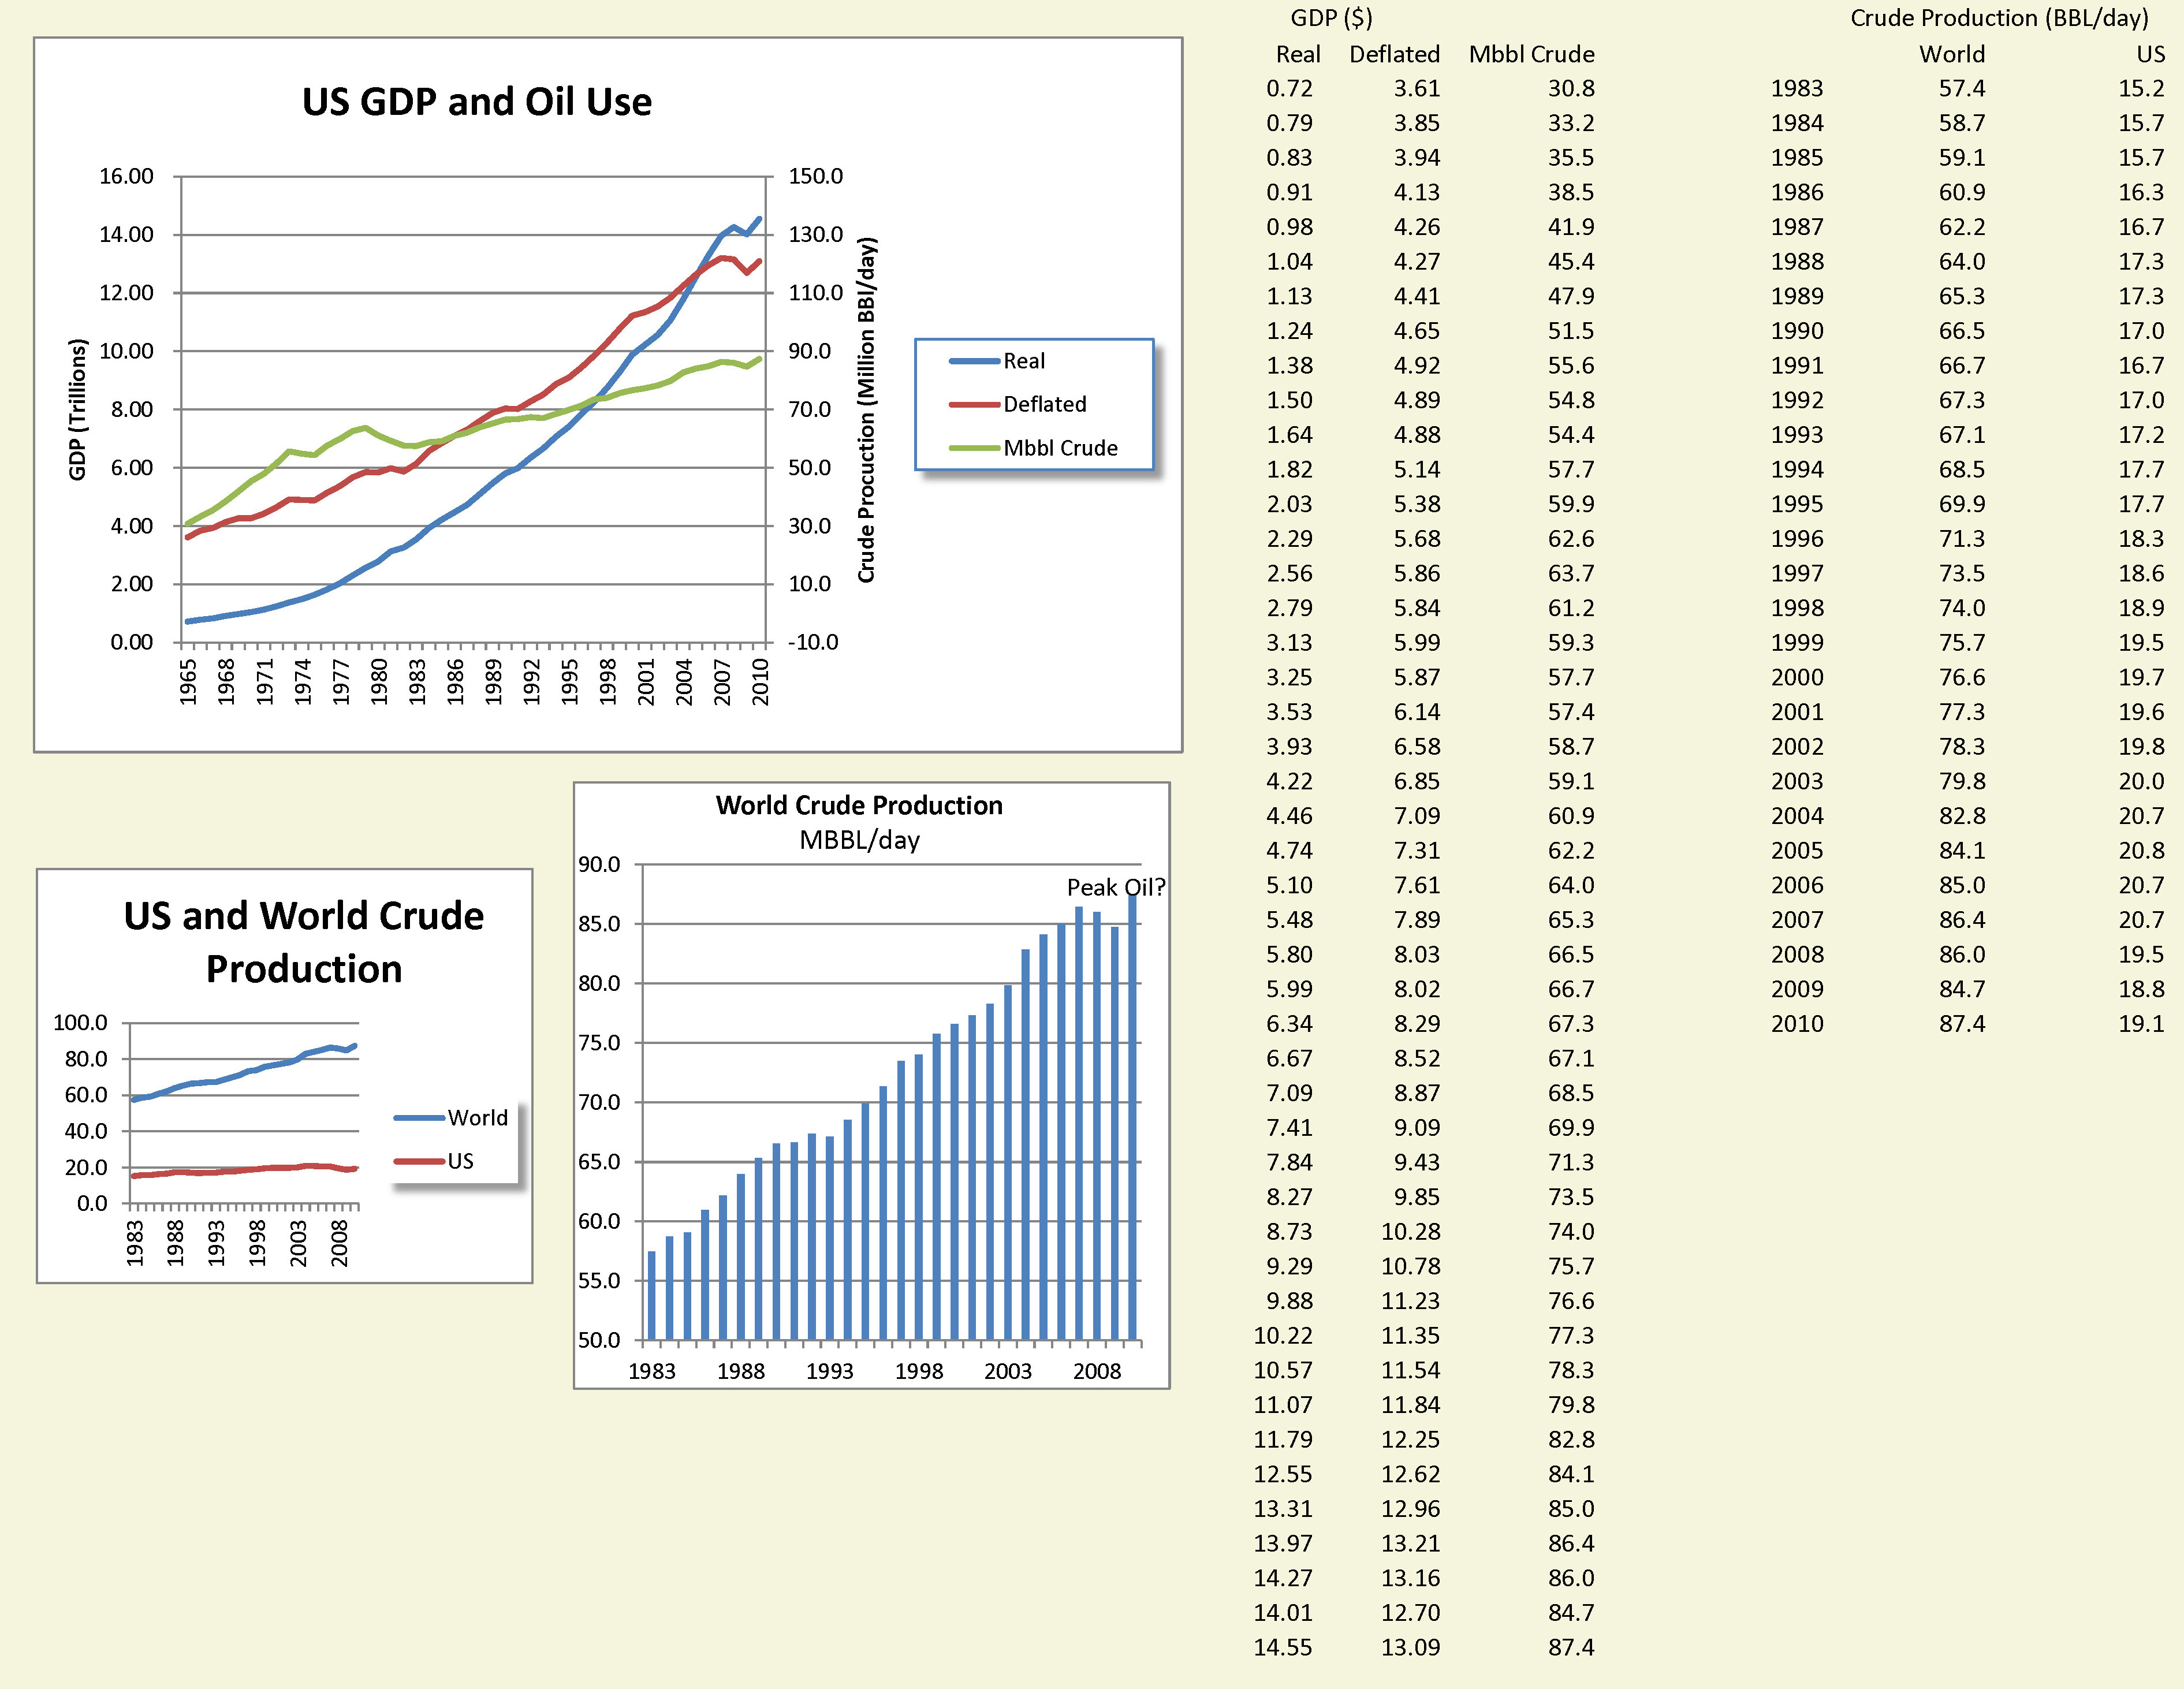 Oil and GDP